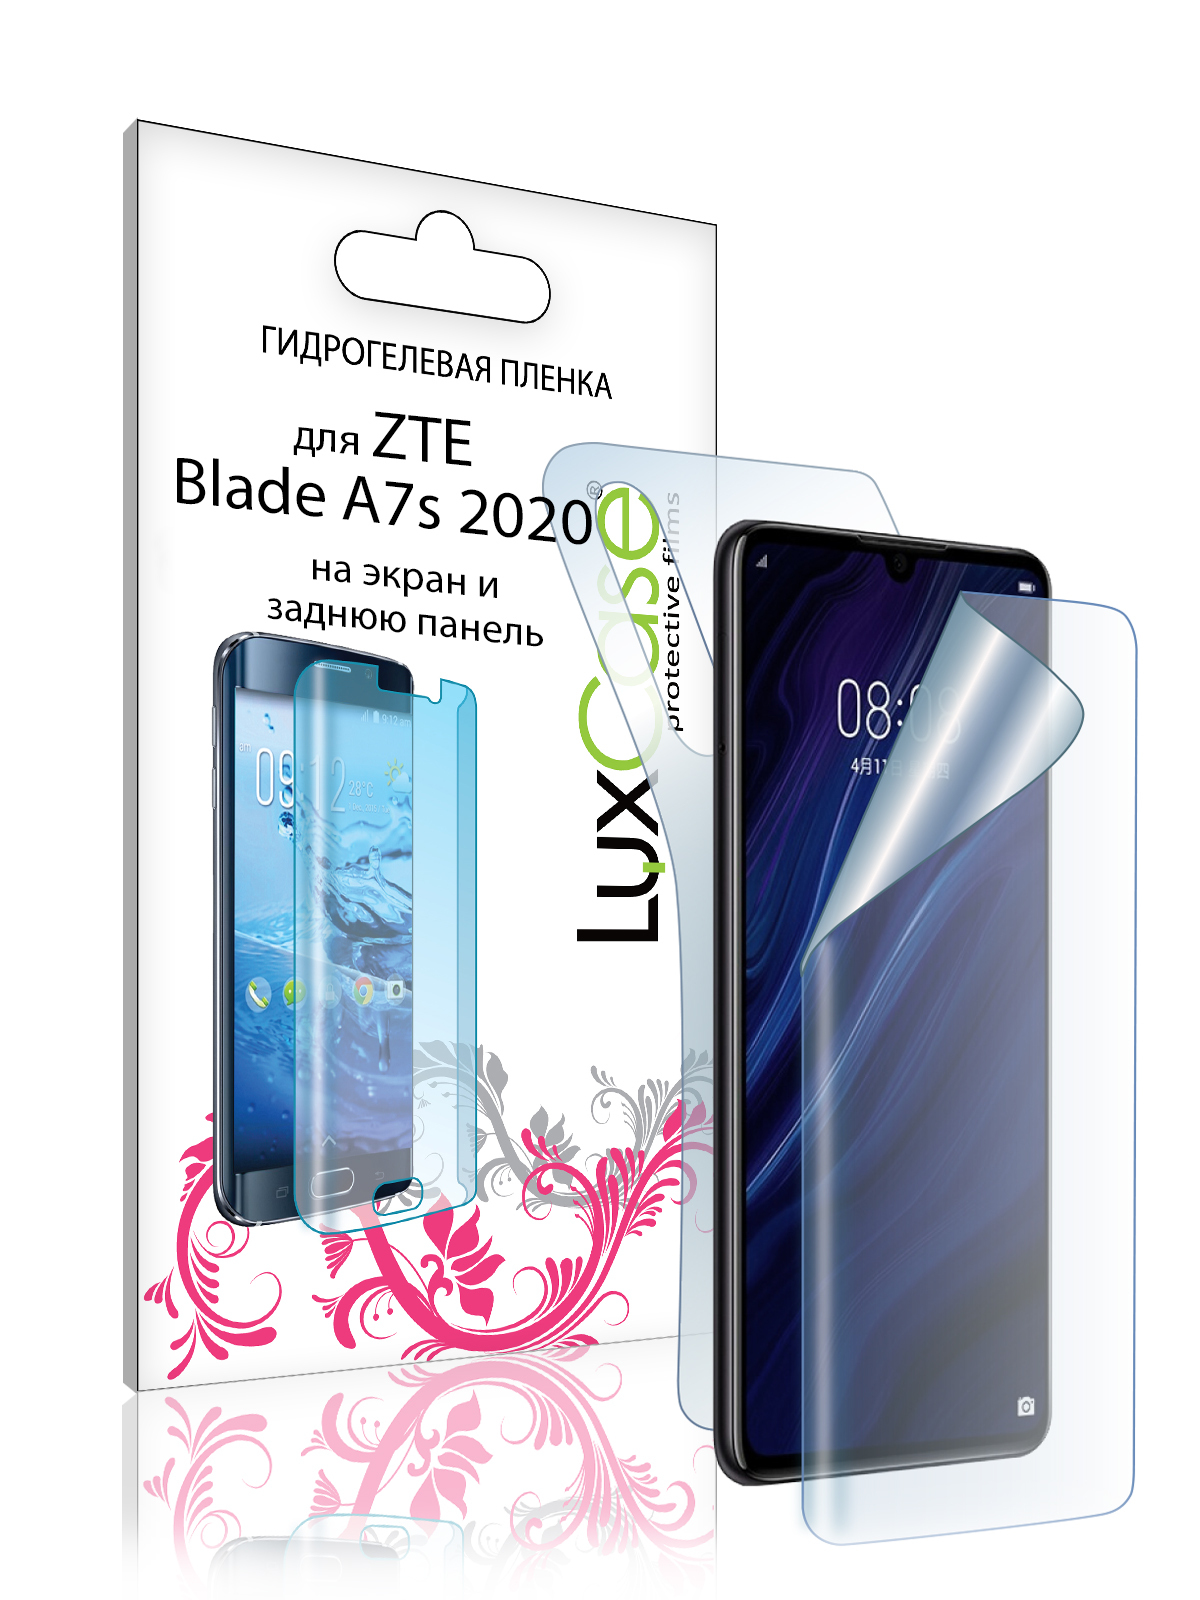 Пленка гидрогелевая LuxCase для ZTE Blade A7S 2020 0.14mm Front and Back Transperent 86714 гидрогелевая пленка luxcase для zte blade a7s 2020 0 14mm front transperent 86712